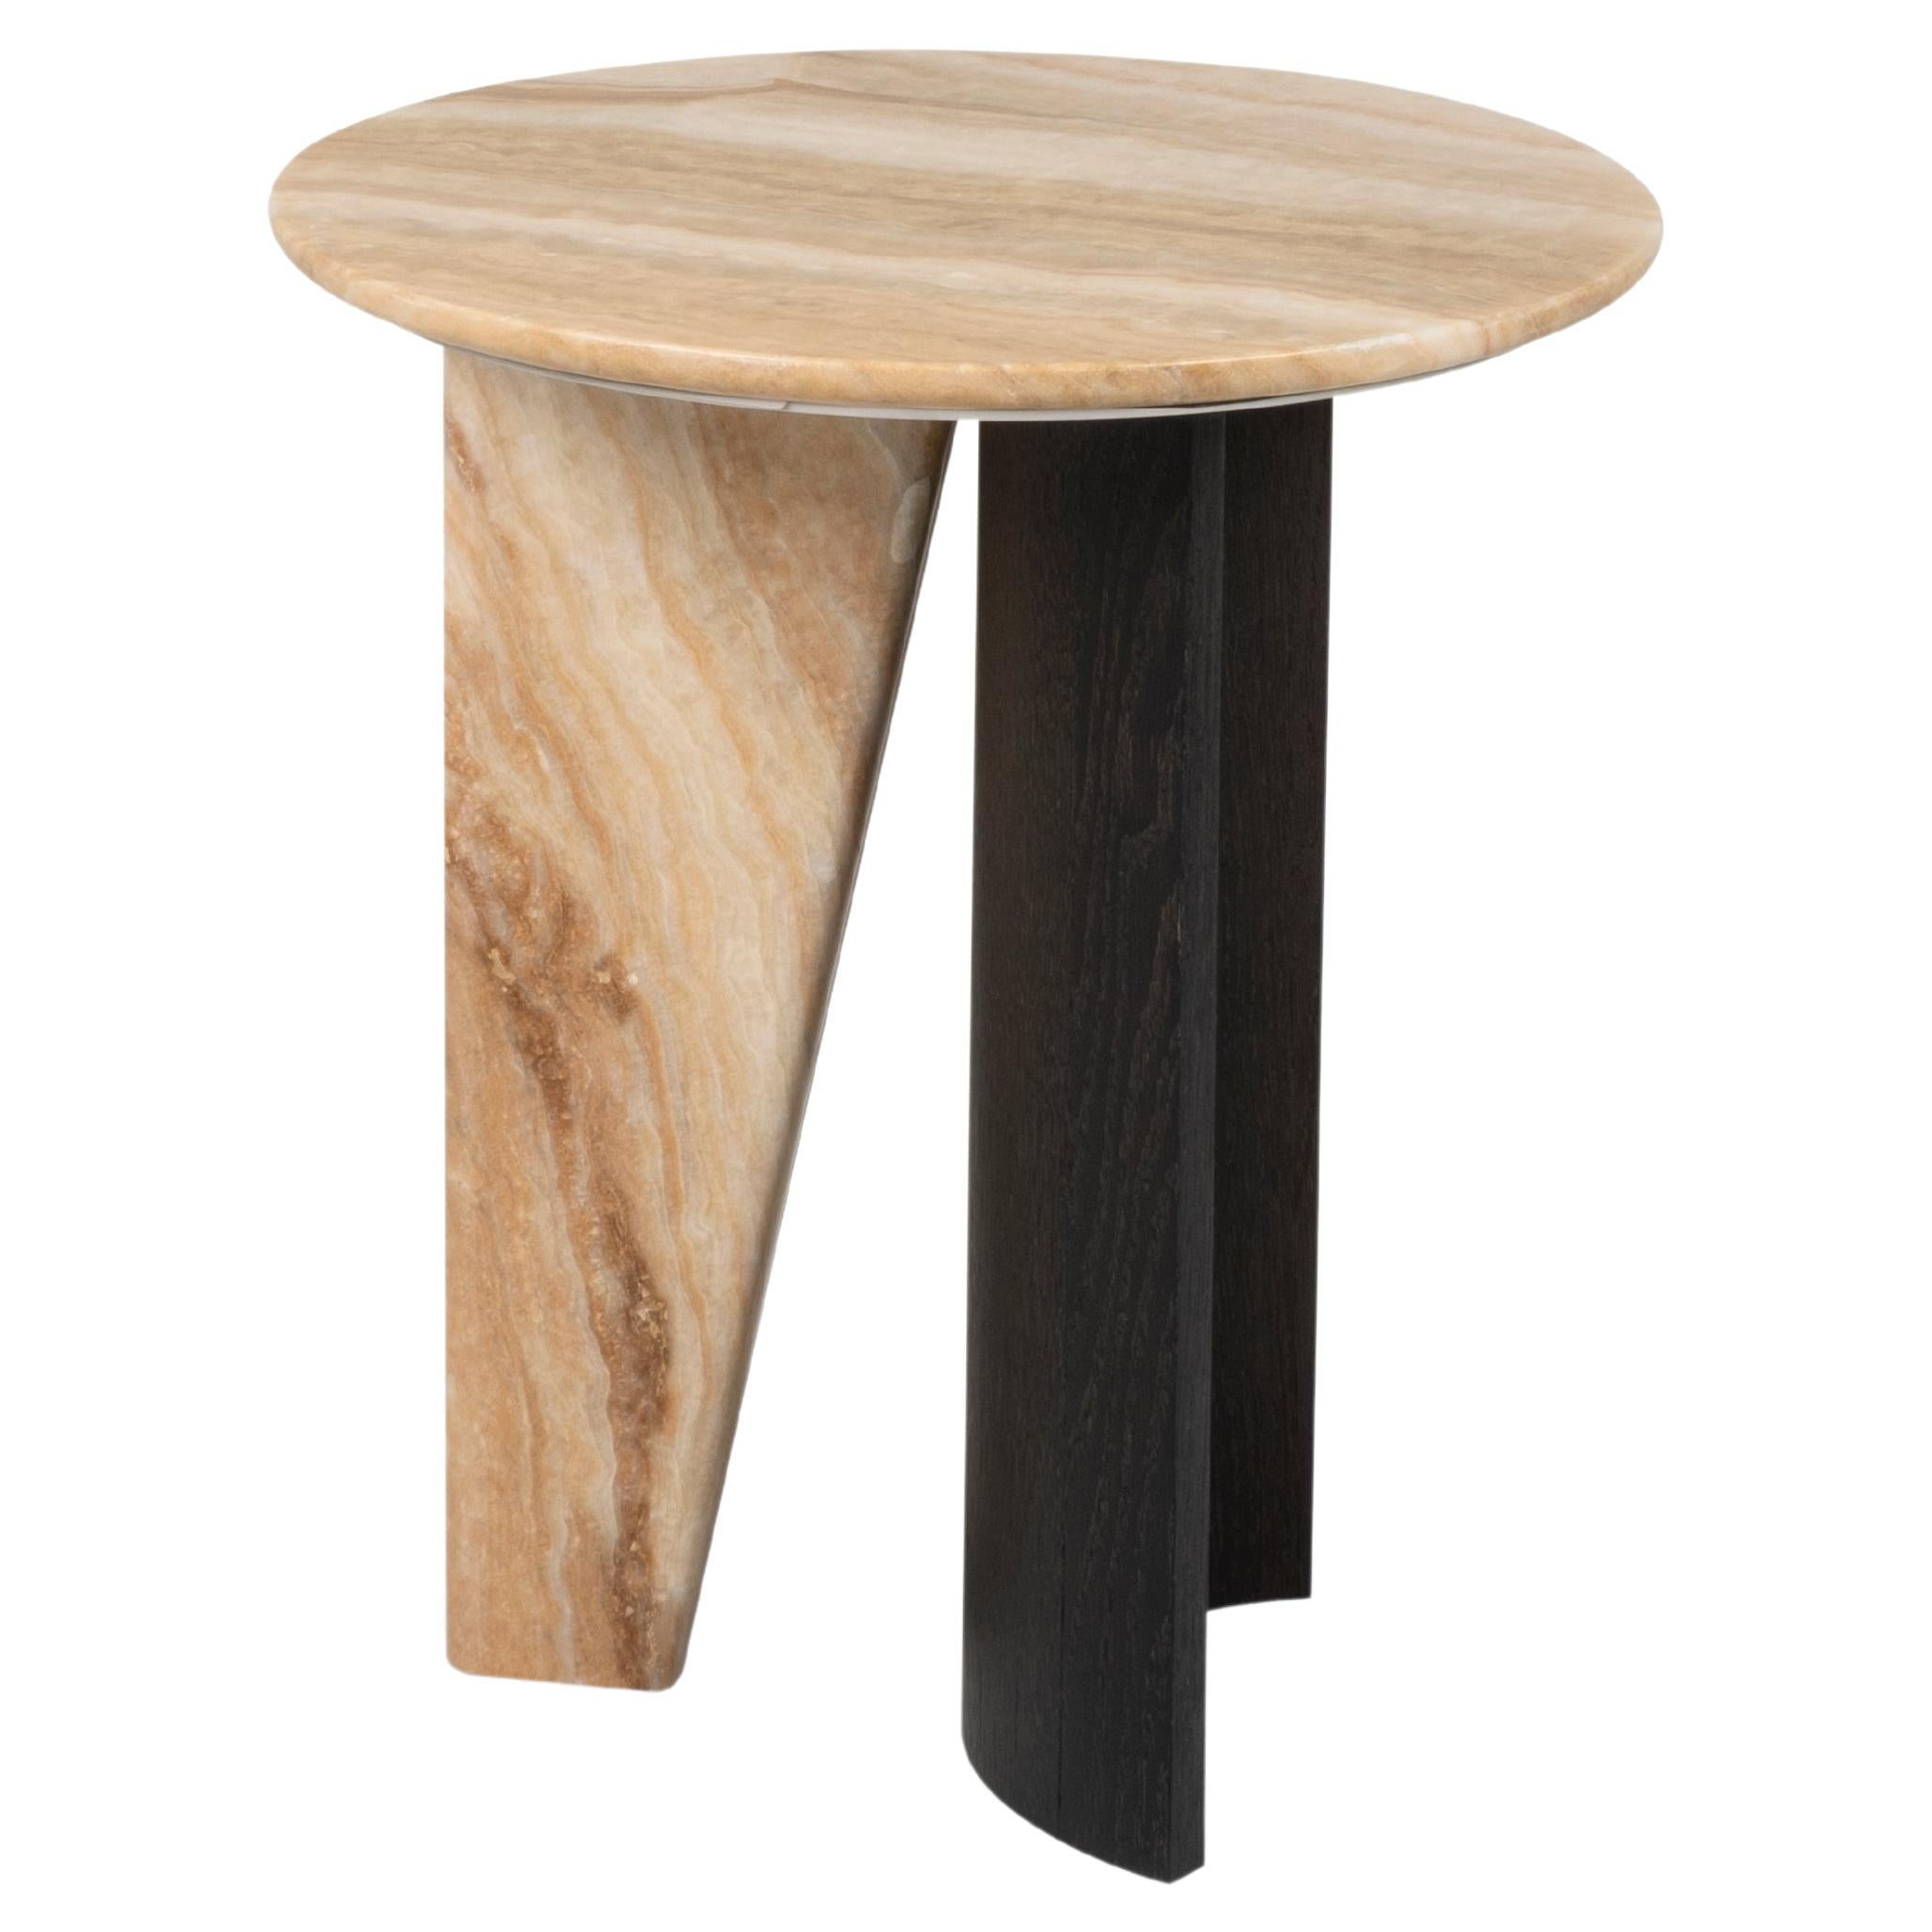 21st Century Modern Foice Side Onyx Table Handcrafted in Portugal by Greenapple